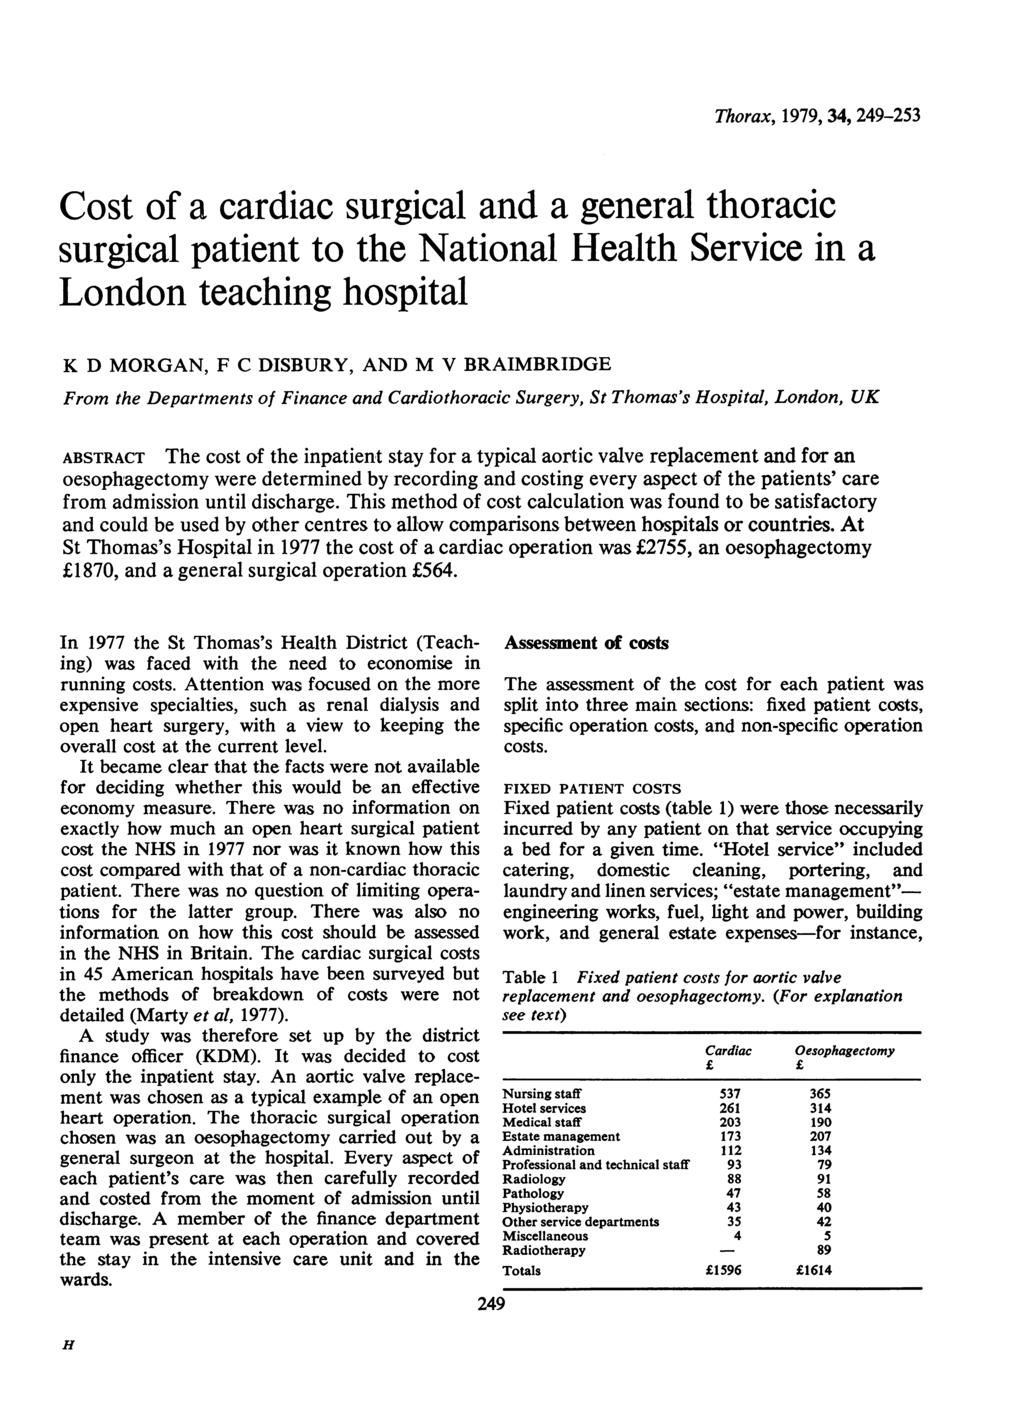 Thorax, 1979, 34, 249-253 Cost of a cardiac surgical and a general thoracic surgical patient to the National Health Service in a London teaching hospital K D MORGAN, F C DISBURY, AND M V BRAIMBRIDGE